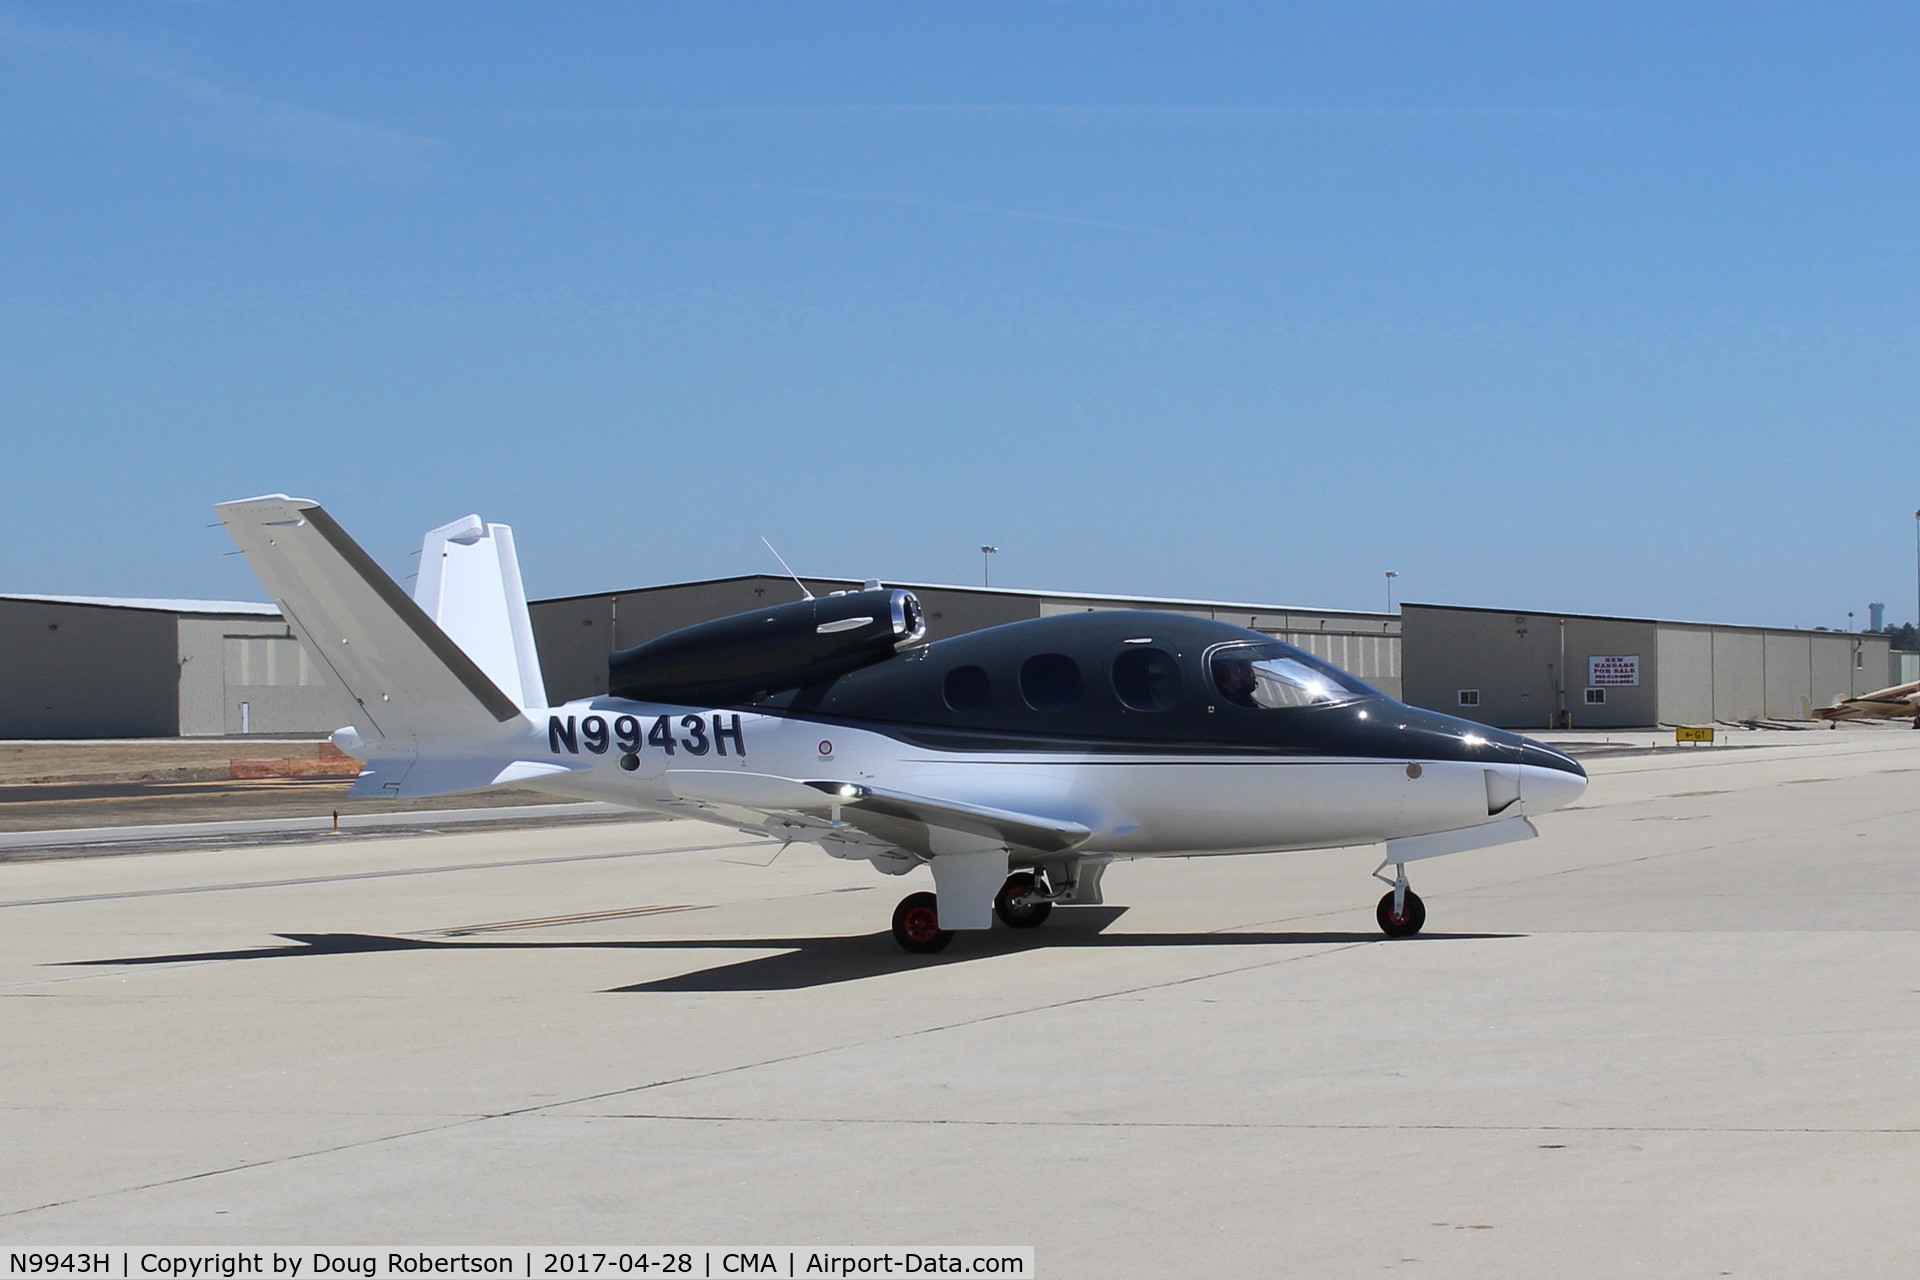 N9943H, 2016 Cirrus SF50 Vision C/N 0007, 2016 Cirrus Design Corp. VISION SF50, Williams FJ33-5A Turbofan, taxi on the show-planes ramp. At AOPA FLY-IN.